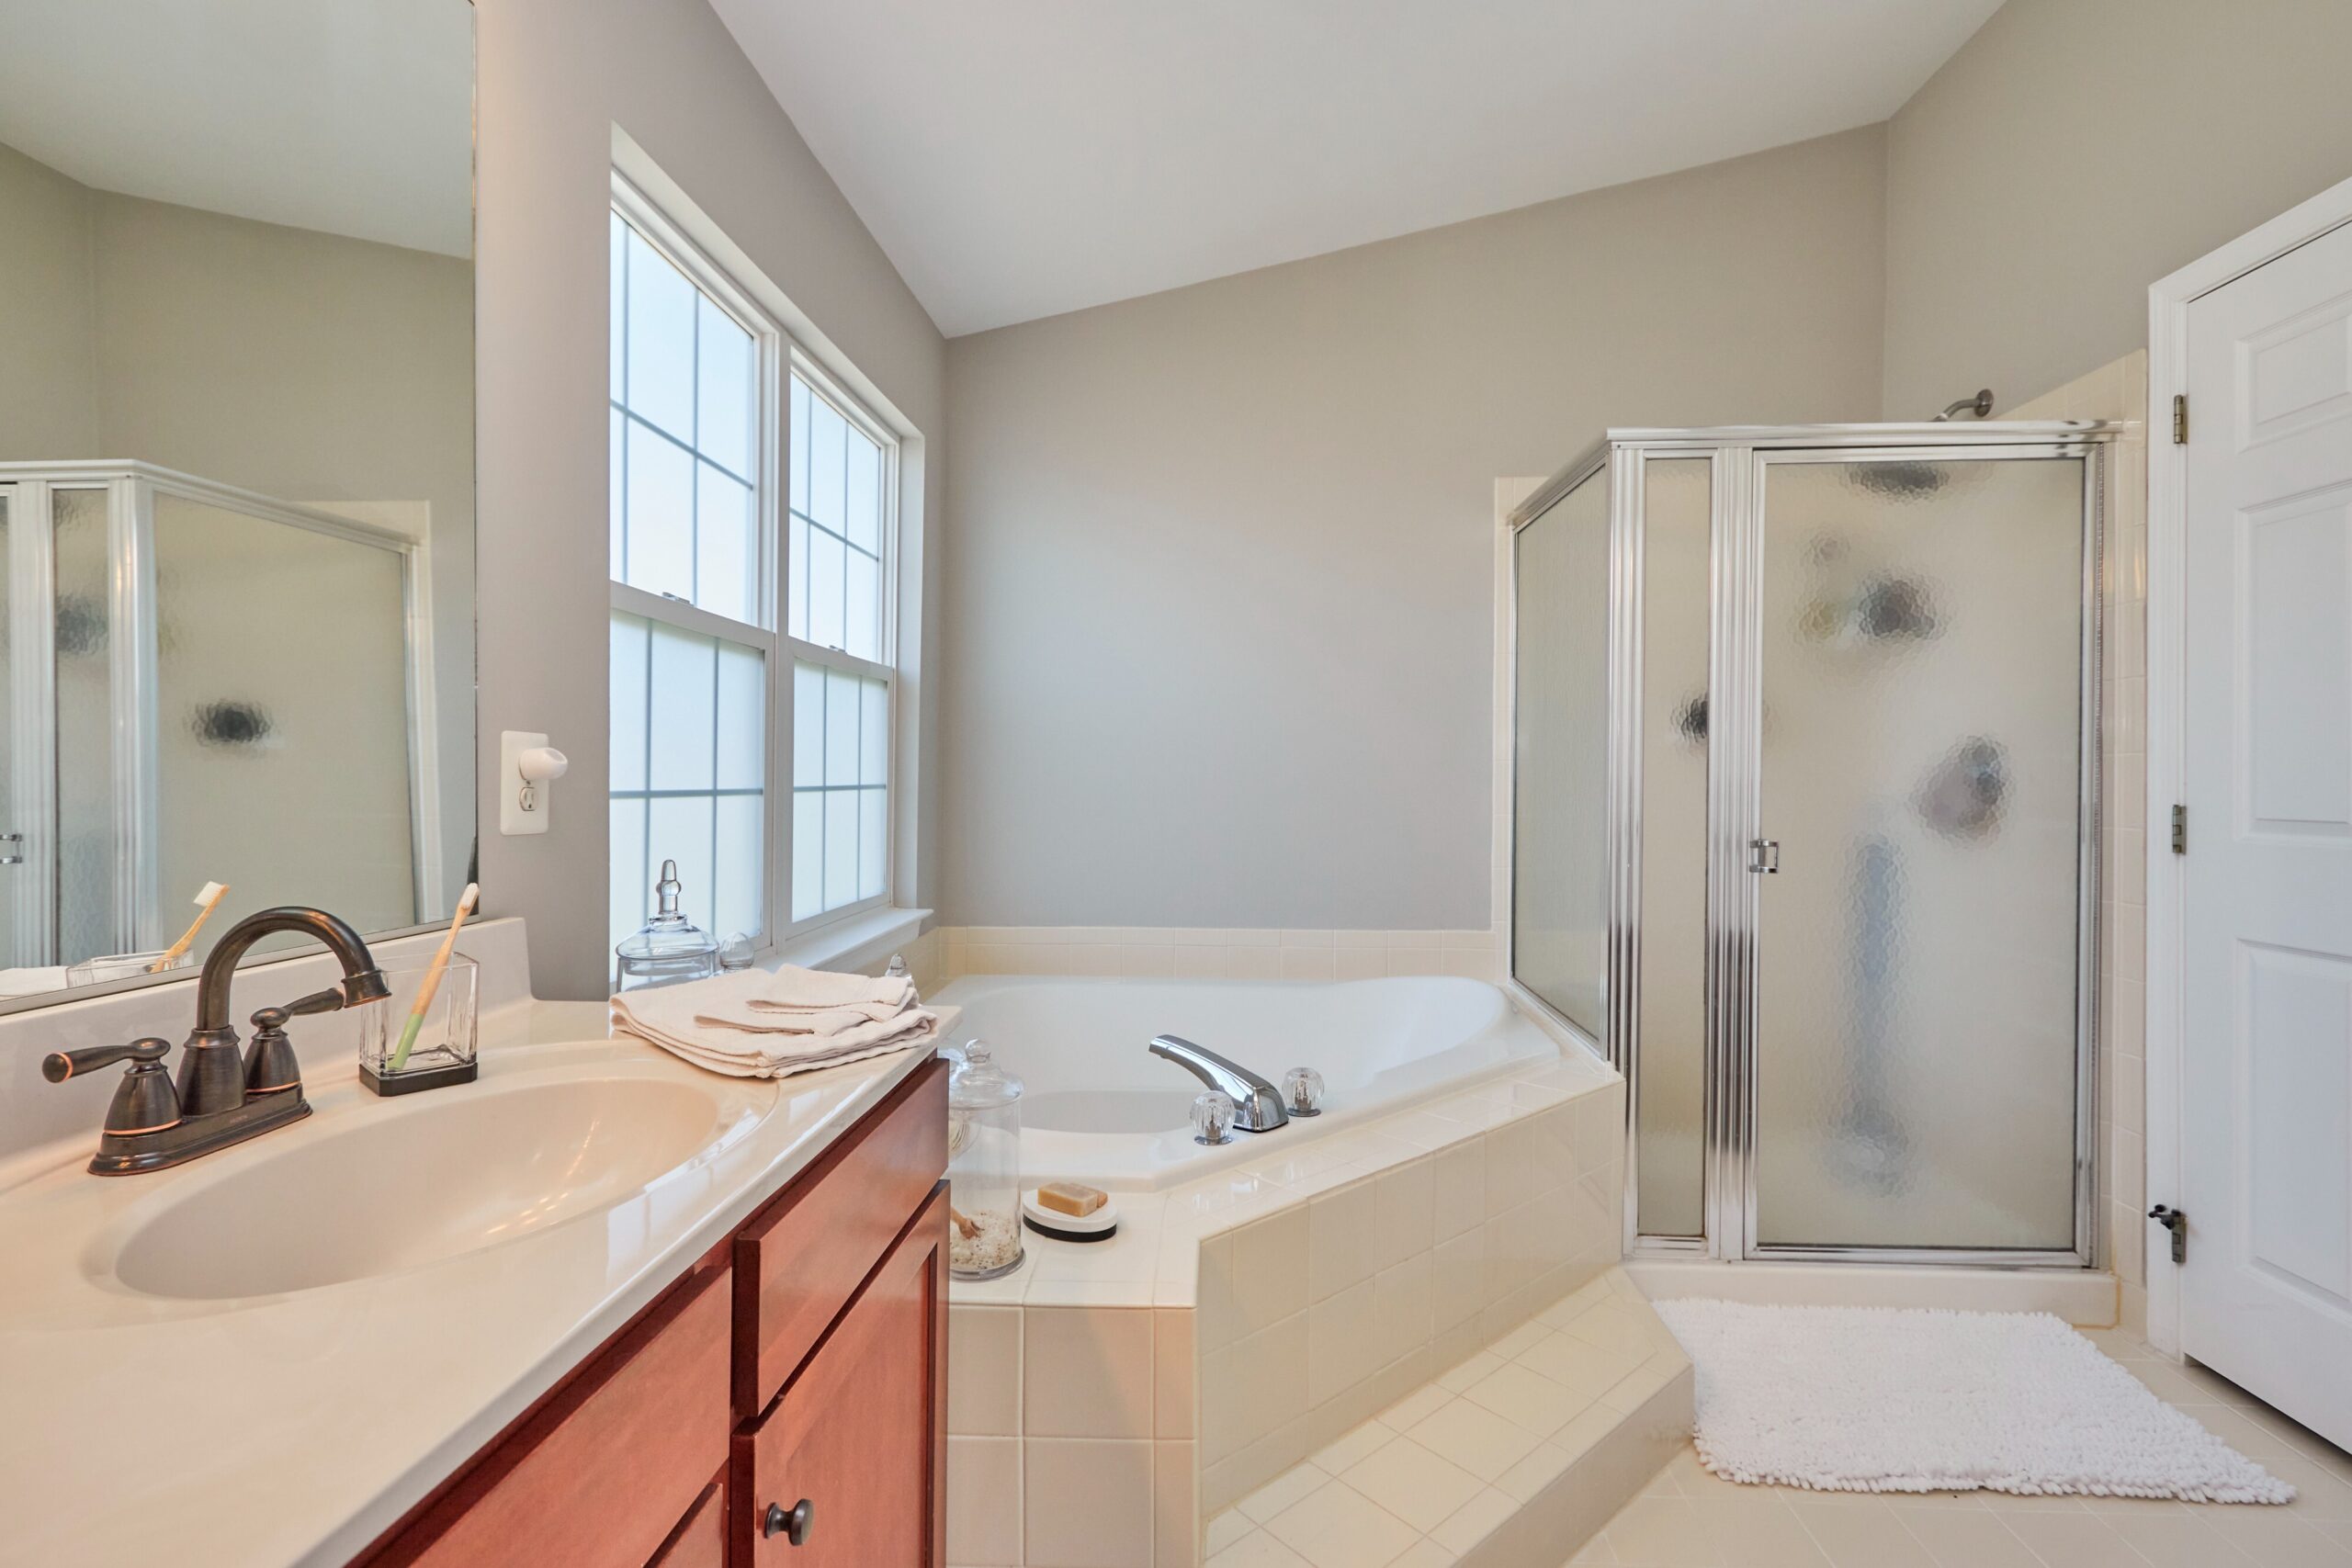 Professional interior photo of 25499 Beresford Drive, Chantilly, Virginia - showing the primary bathroom with jacuzzi tub and walk in shower